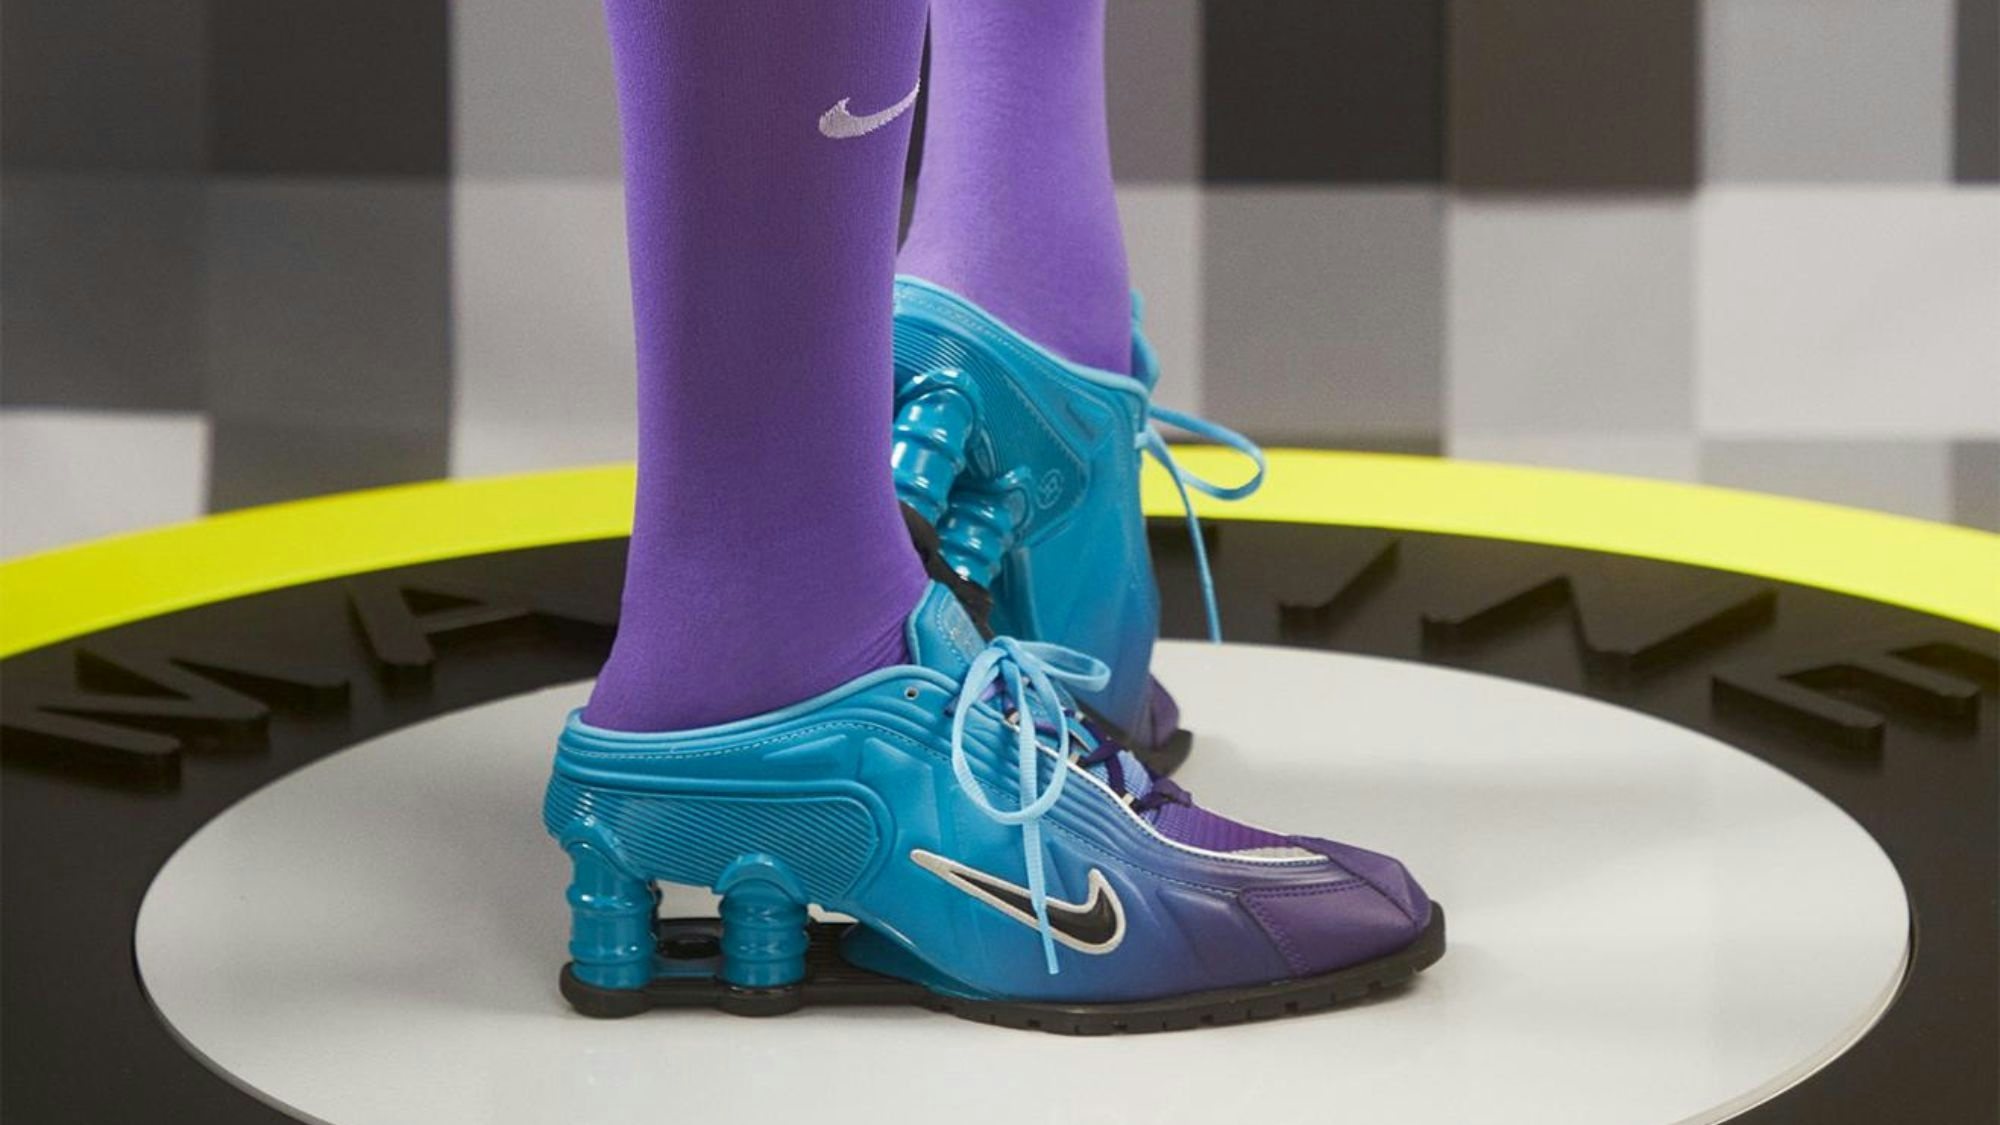 Joining Tiffany in the top spot of designer sneaker price premiums in 2023, Martine Rose's continued collaboration with Nike on the Shox sneaker was another major success for the sportswear giant. Photo: Nike x Martine Rose